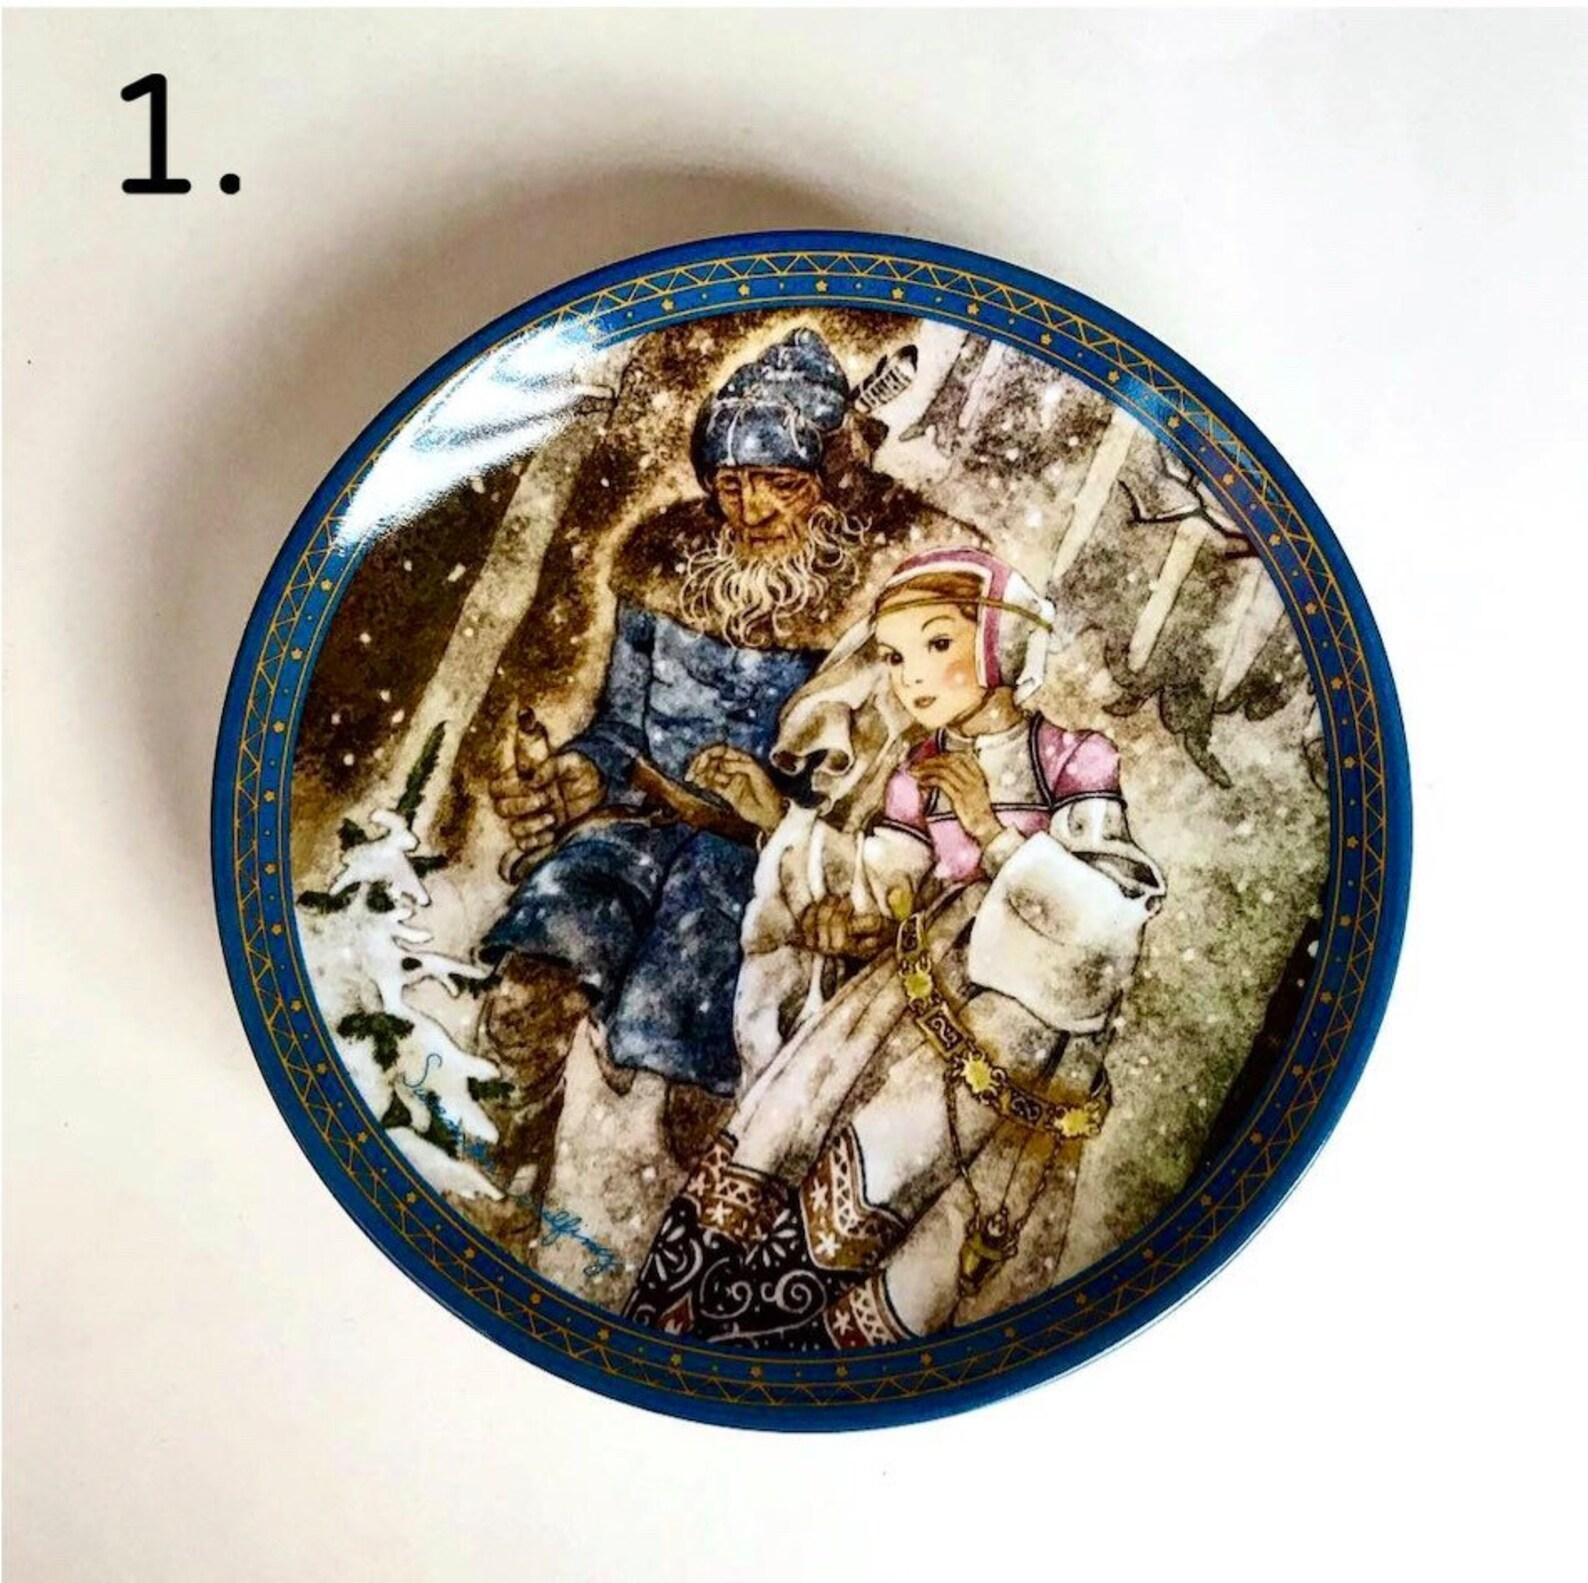 A series of magnificent rare plates “Sulamith: Songs of Love”, by the wonderful artist Sulamith Wulfing, 1901 - 1989. In 1993-1994 They are listed in the Bradex catalog under their own number. 

Diameter 7.6 inc (19.5 cm).

There are holes for